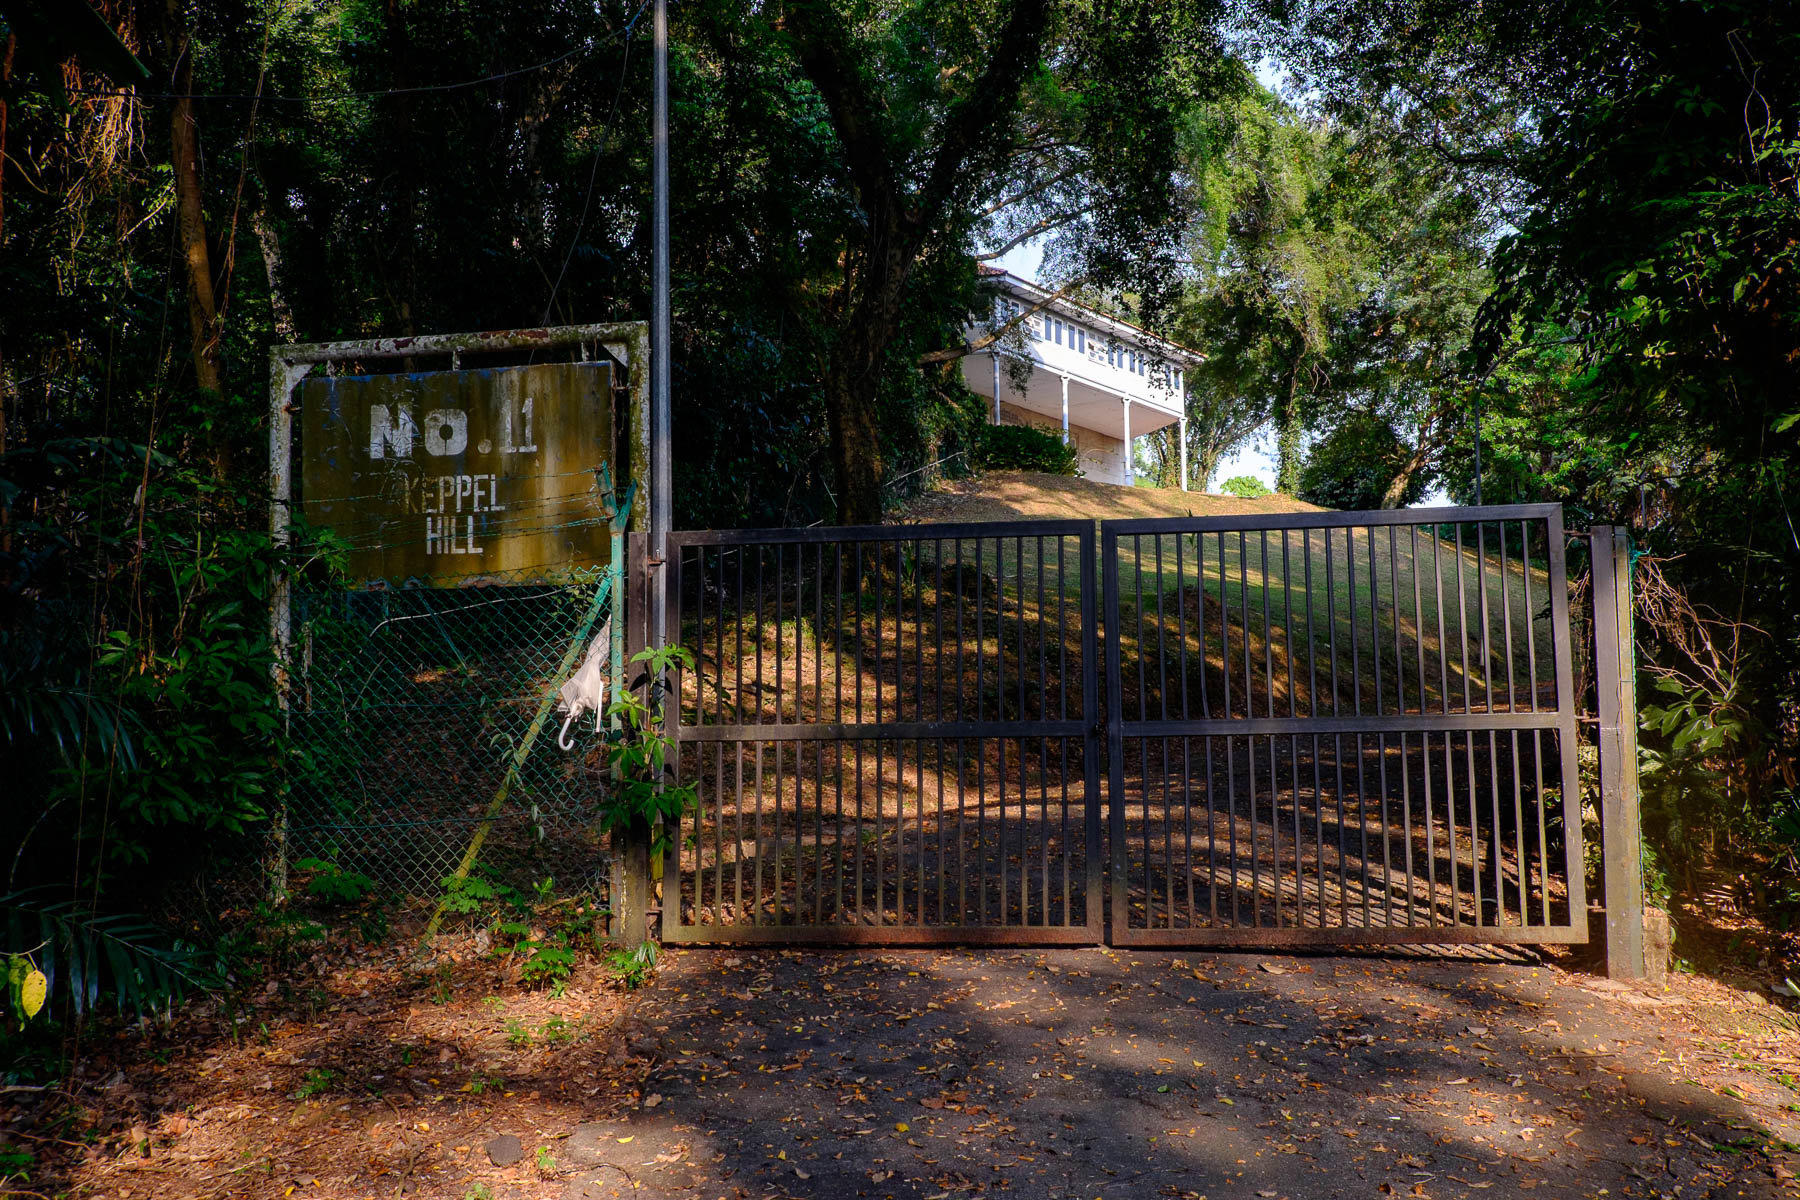 abandoned mansions - no.11 keppel hill house entrance